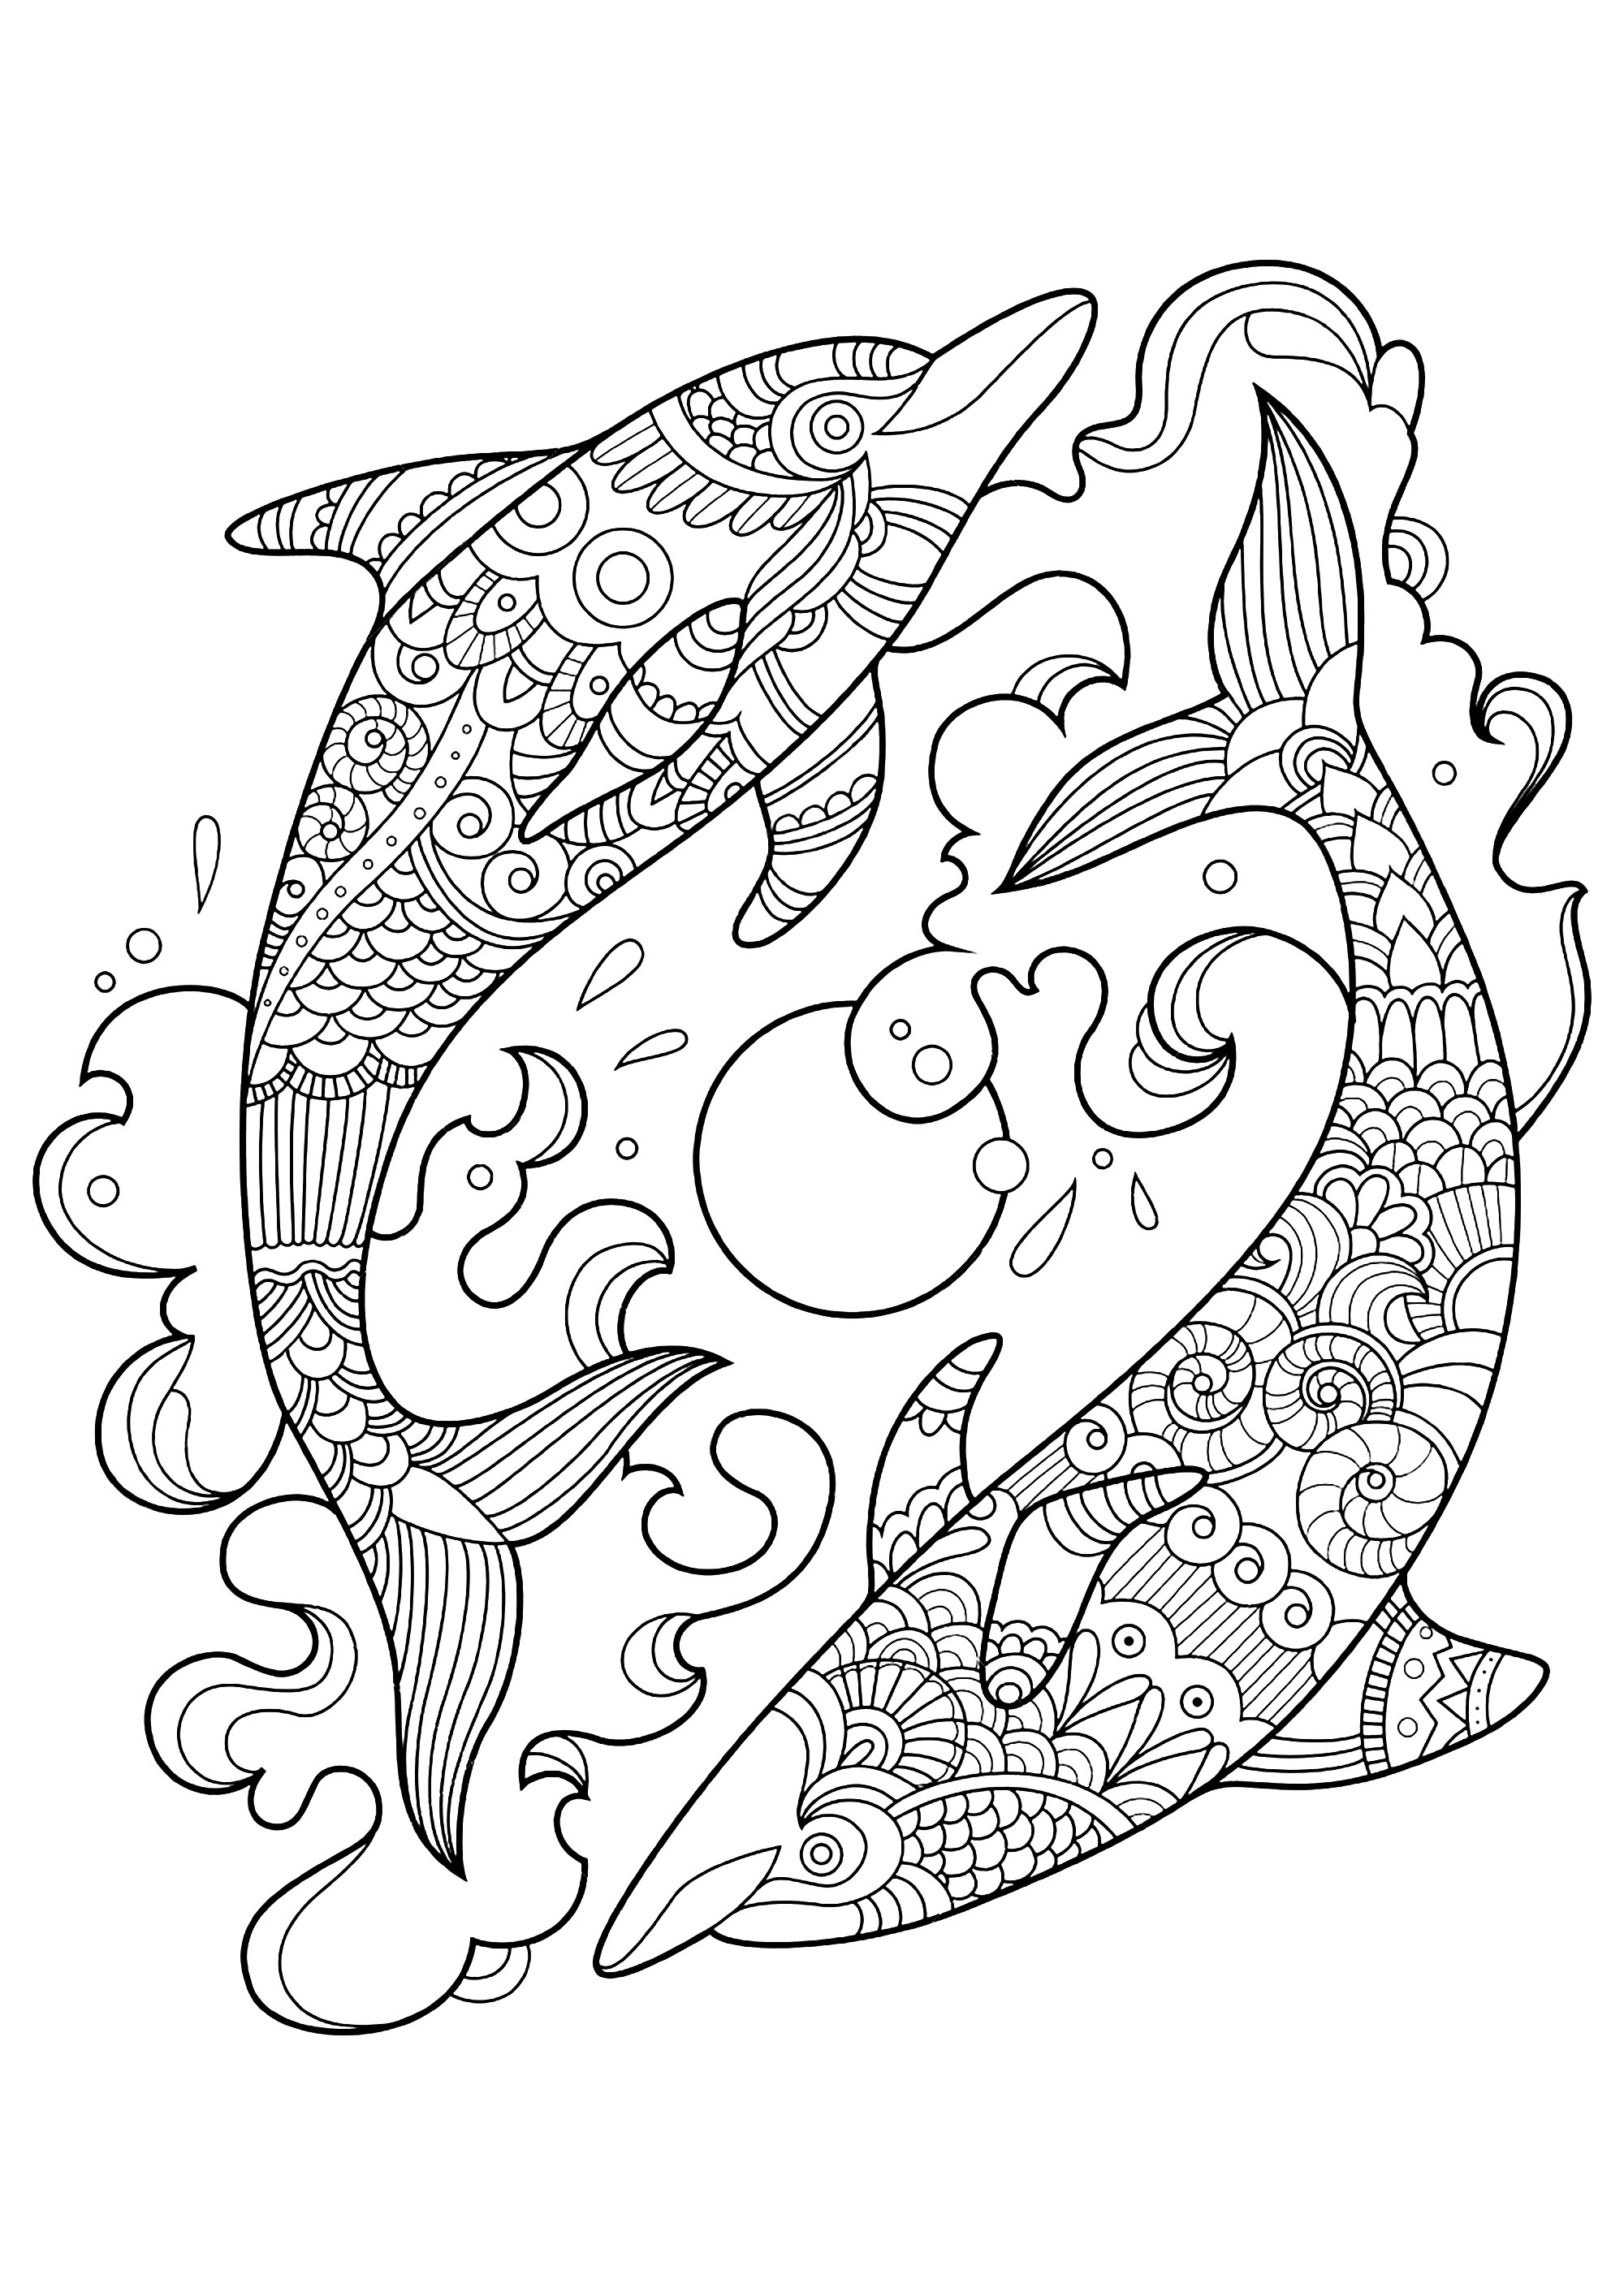 dolphin coloring page miami dolphins coloring sheets bestappsforkidscom page dolphin coloring 